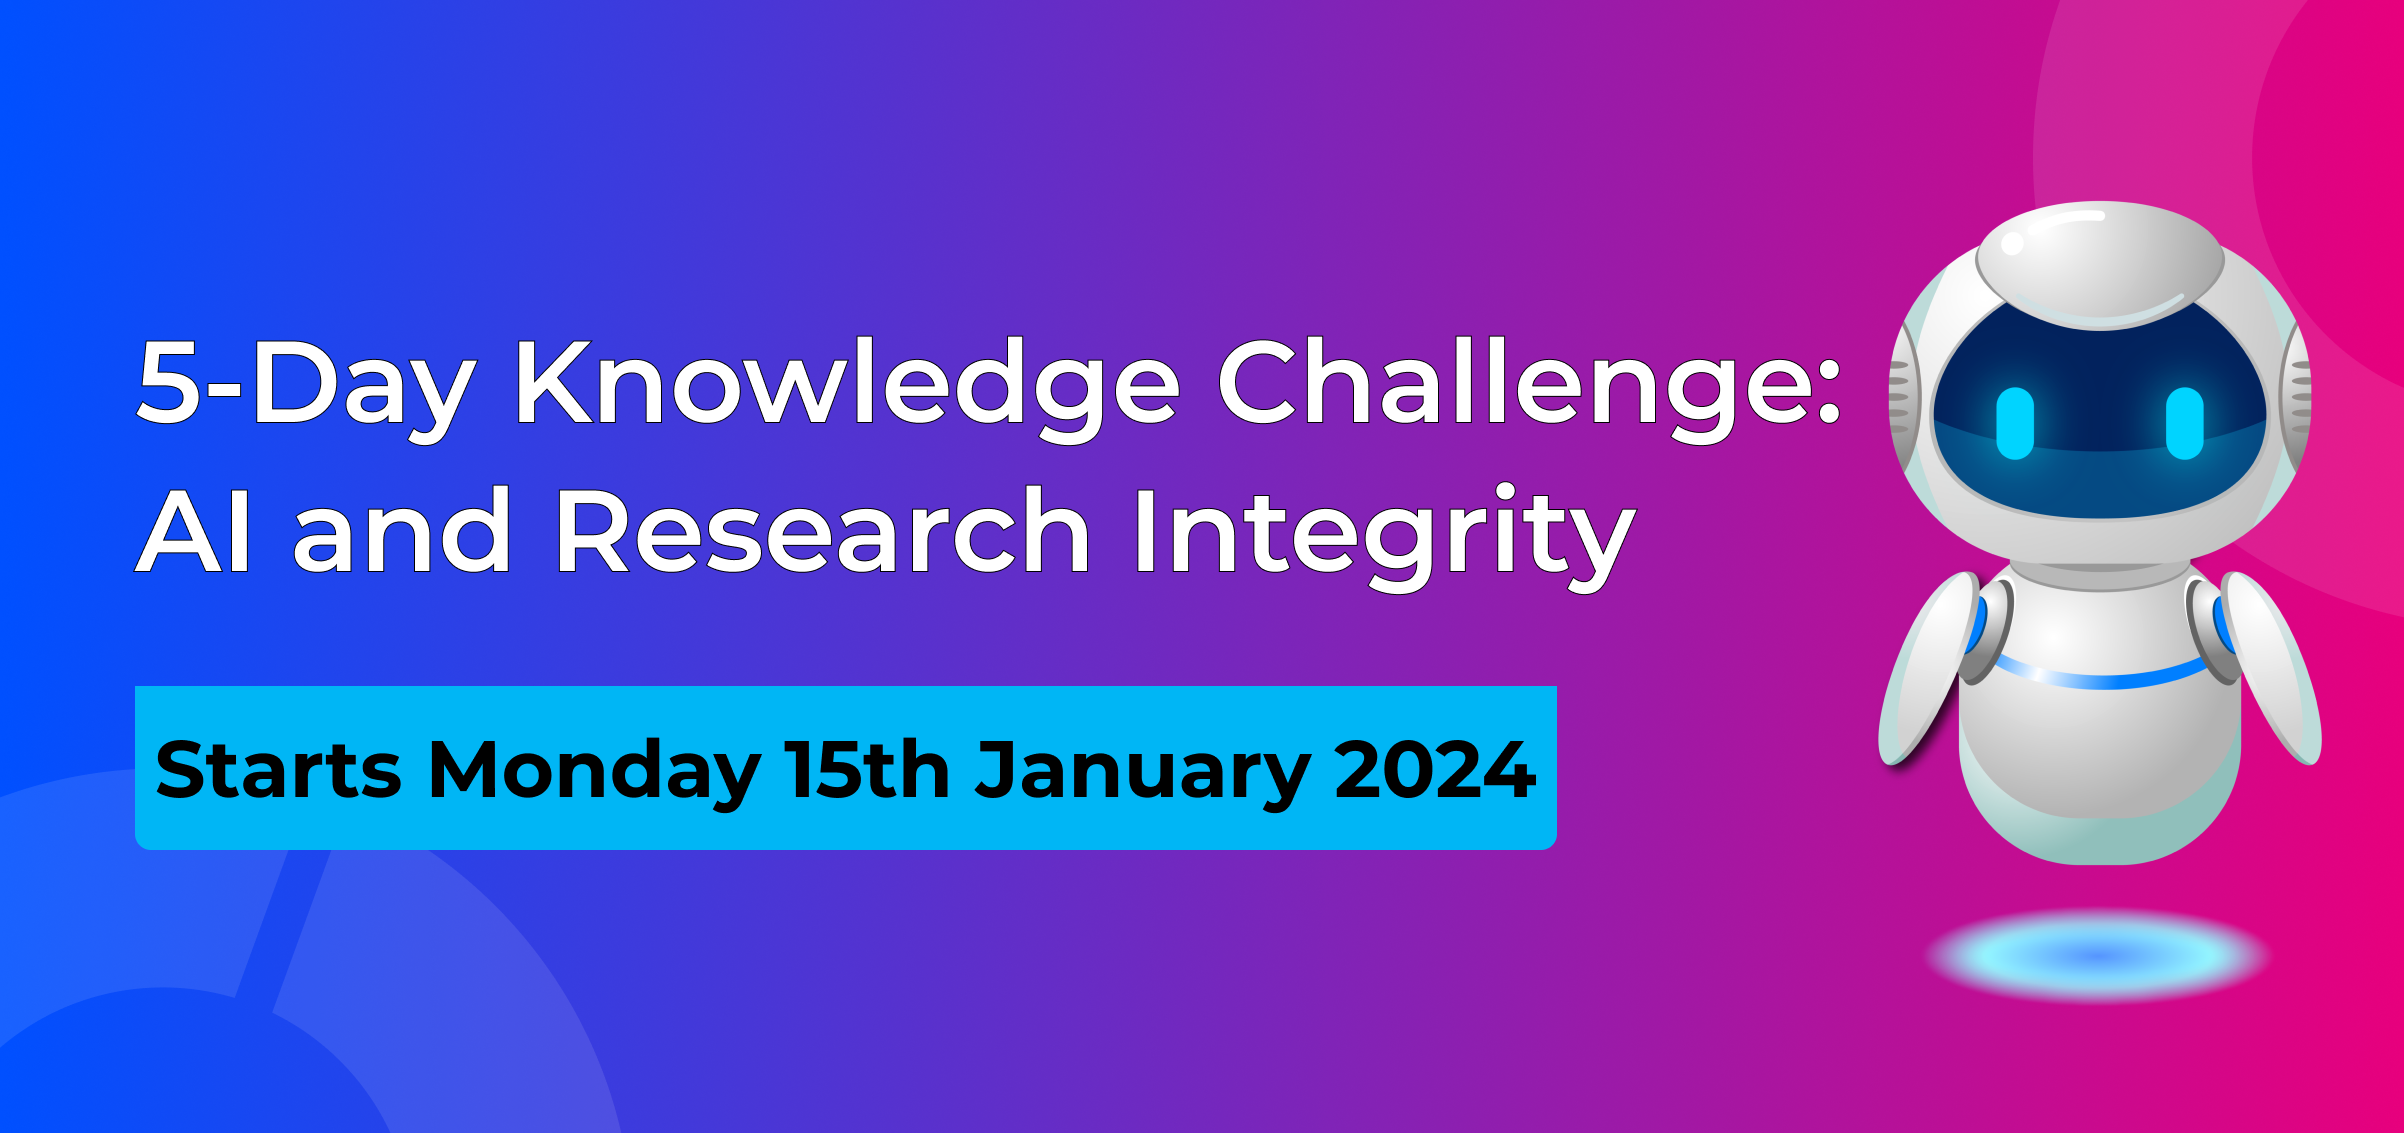 5-Day Knowledge Challenge: AI and Research Integrity